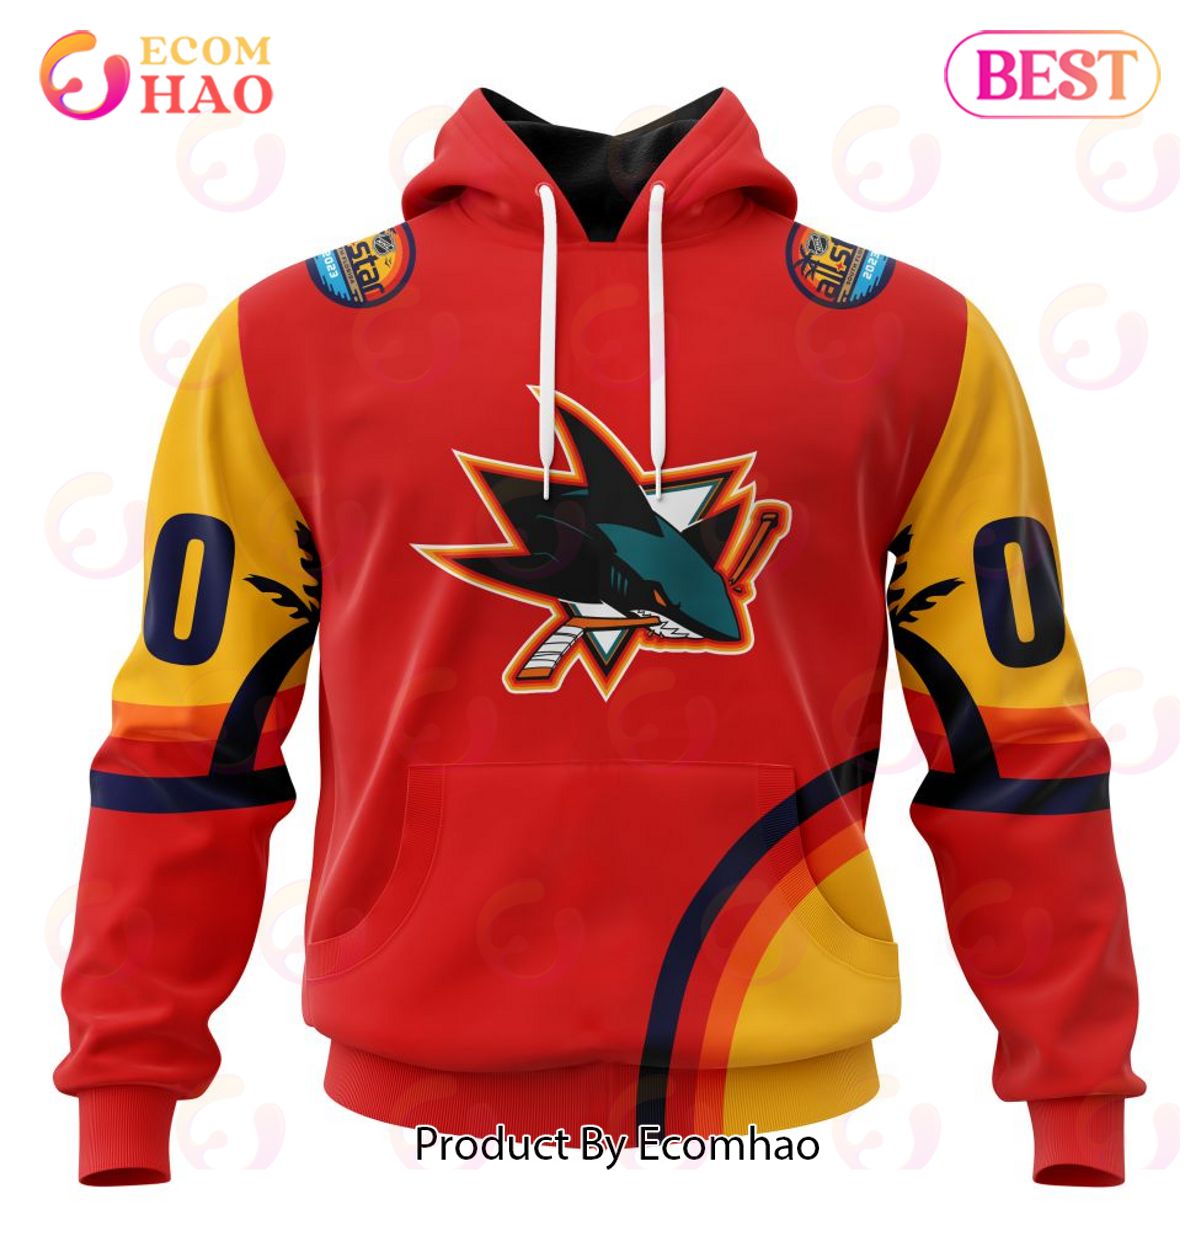 NHL San Jose Sharks Special ALL Star Game Design With Florida Sunset 3D Hoodie